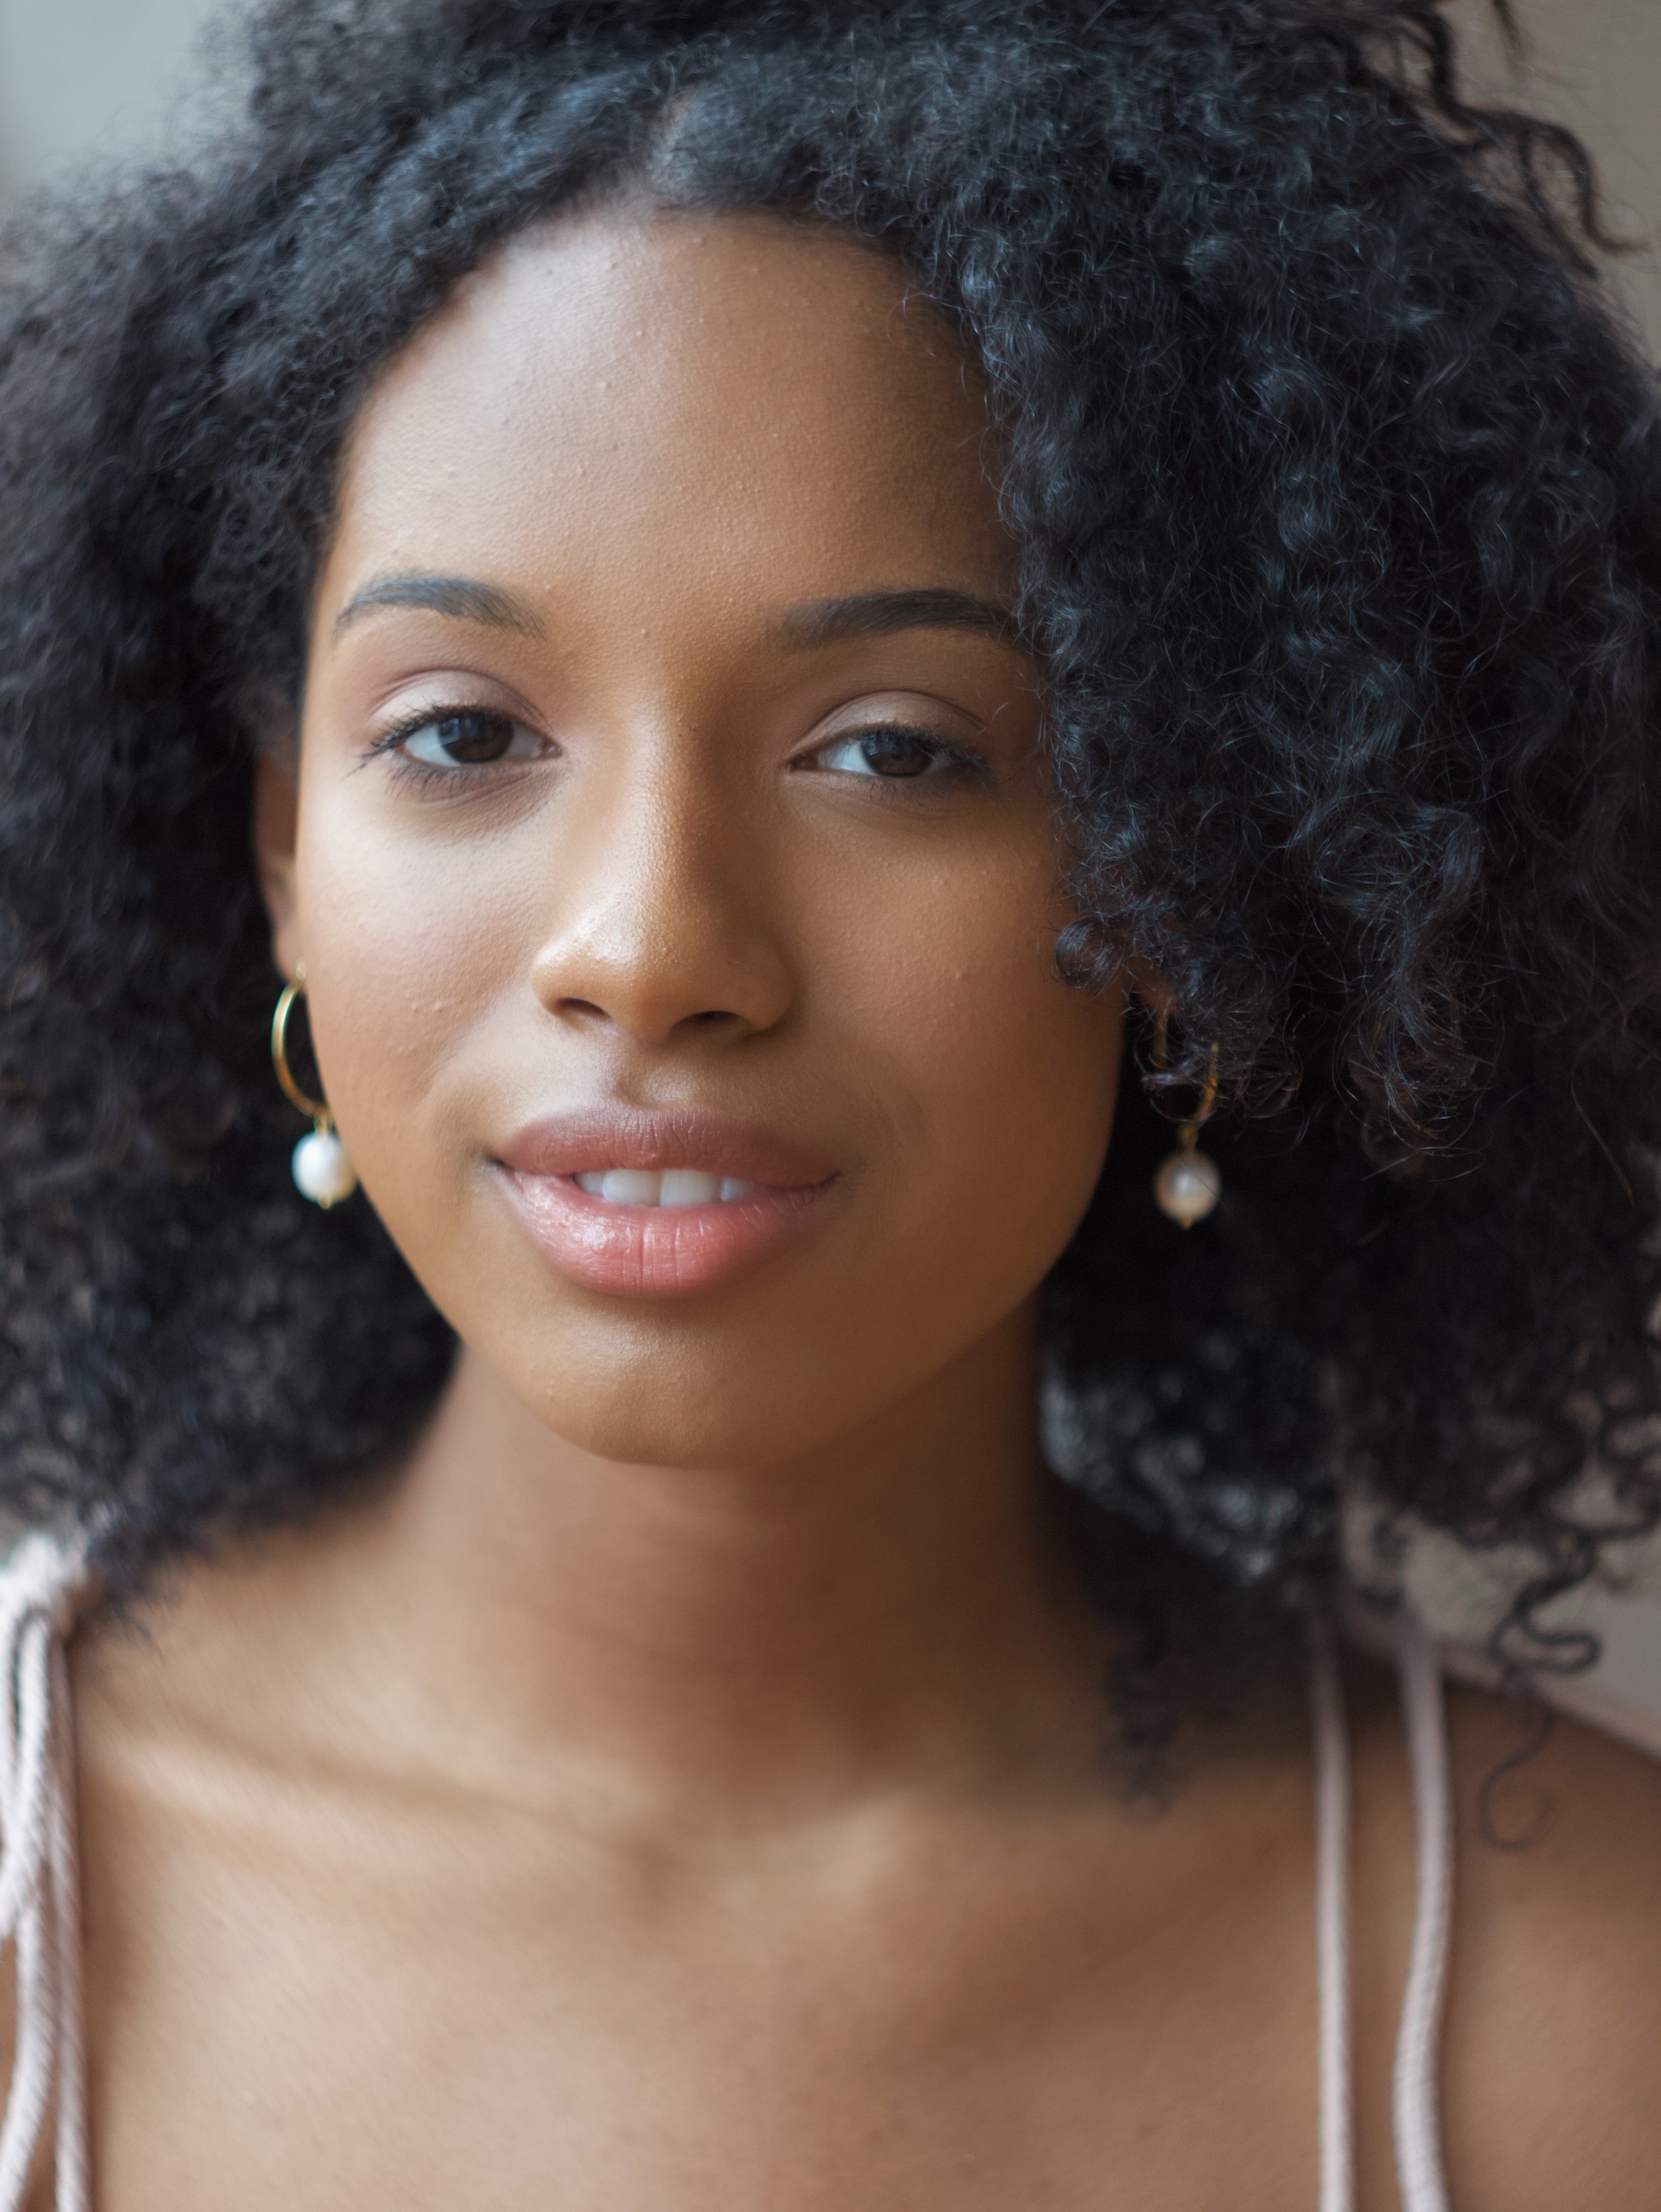 A Black woman with curly shoulder-length hair looking at the camera with one eyebrow raised. She wears small gold hoop earrings with pearls on the ends